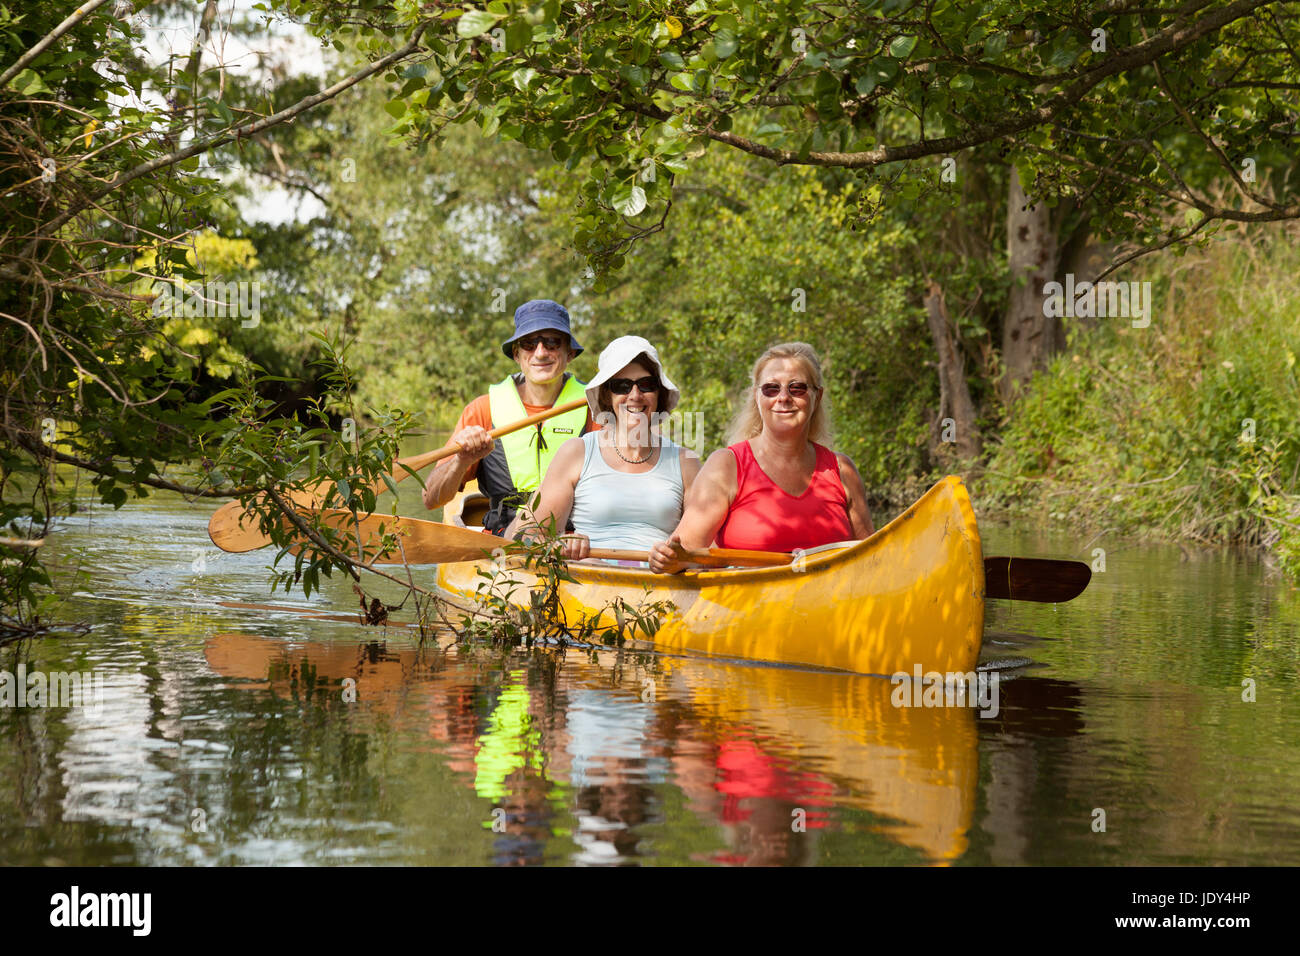 Three people in a canoe, canoeing on the river Lodden, Oxfordshire England UK Stock Photo